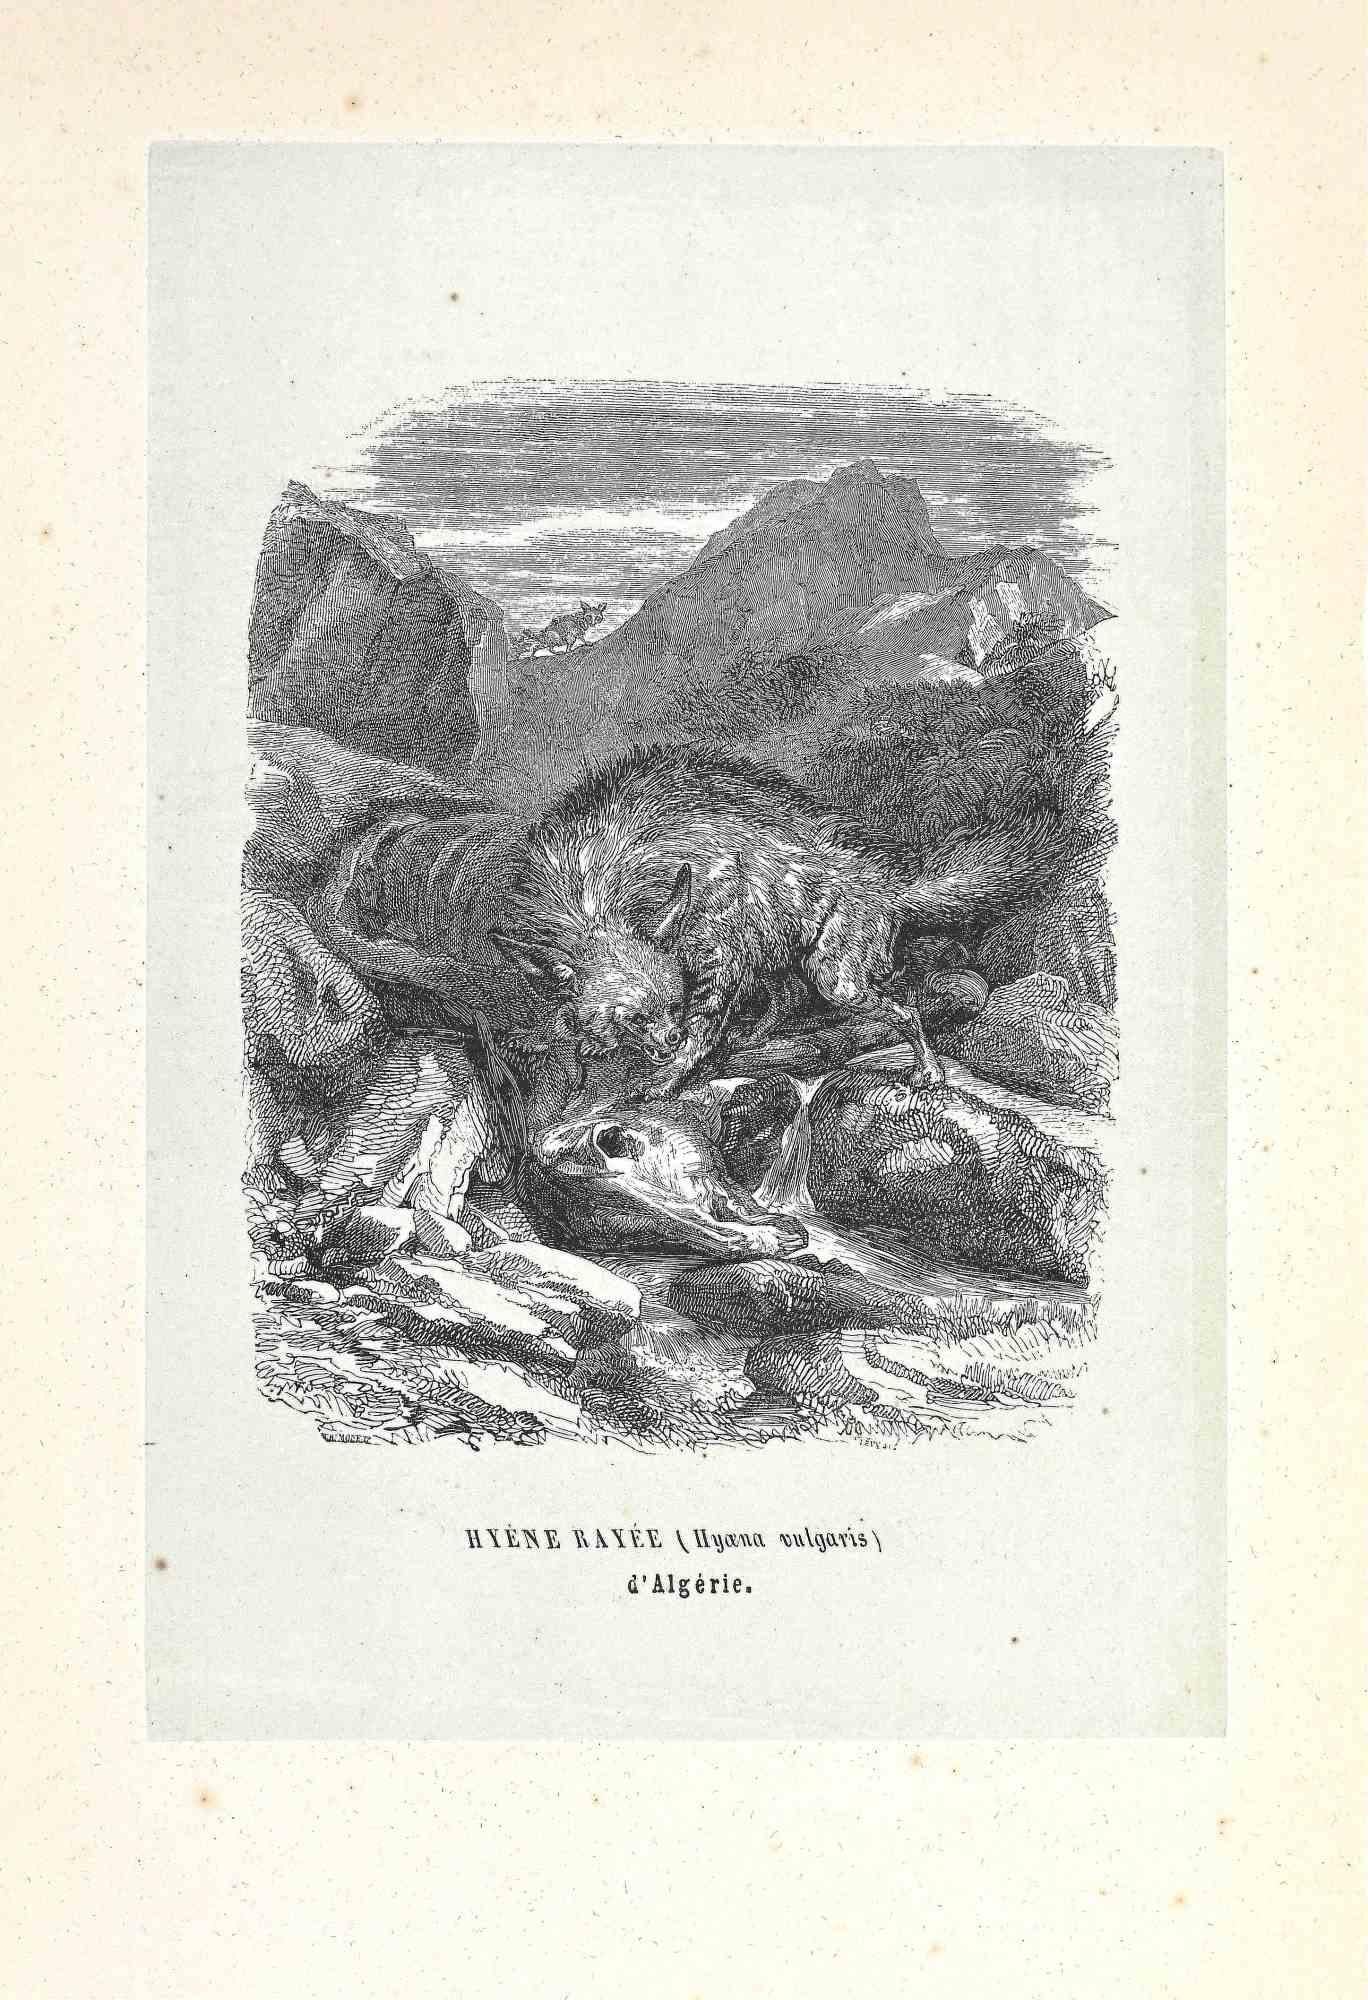 Algerian Hyena is an original lithograph on ivory-colored paper, realized by Paul Gervais (1816-1879). The artwork is from The Series of "Les Trois Règnes de la Nature", and was published in 1854.

Good conditions.

Titled on the lower.

The series